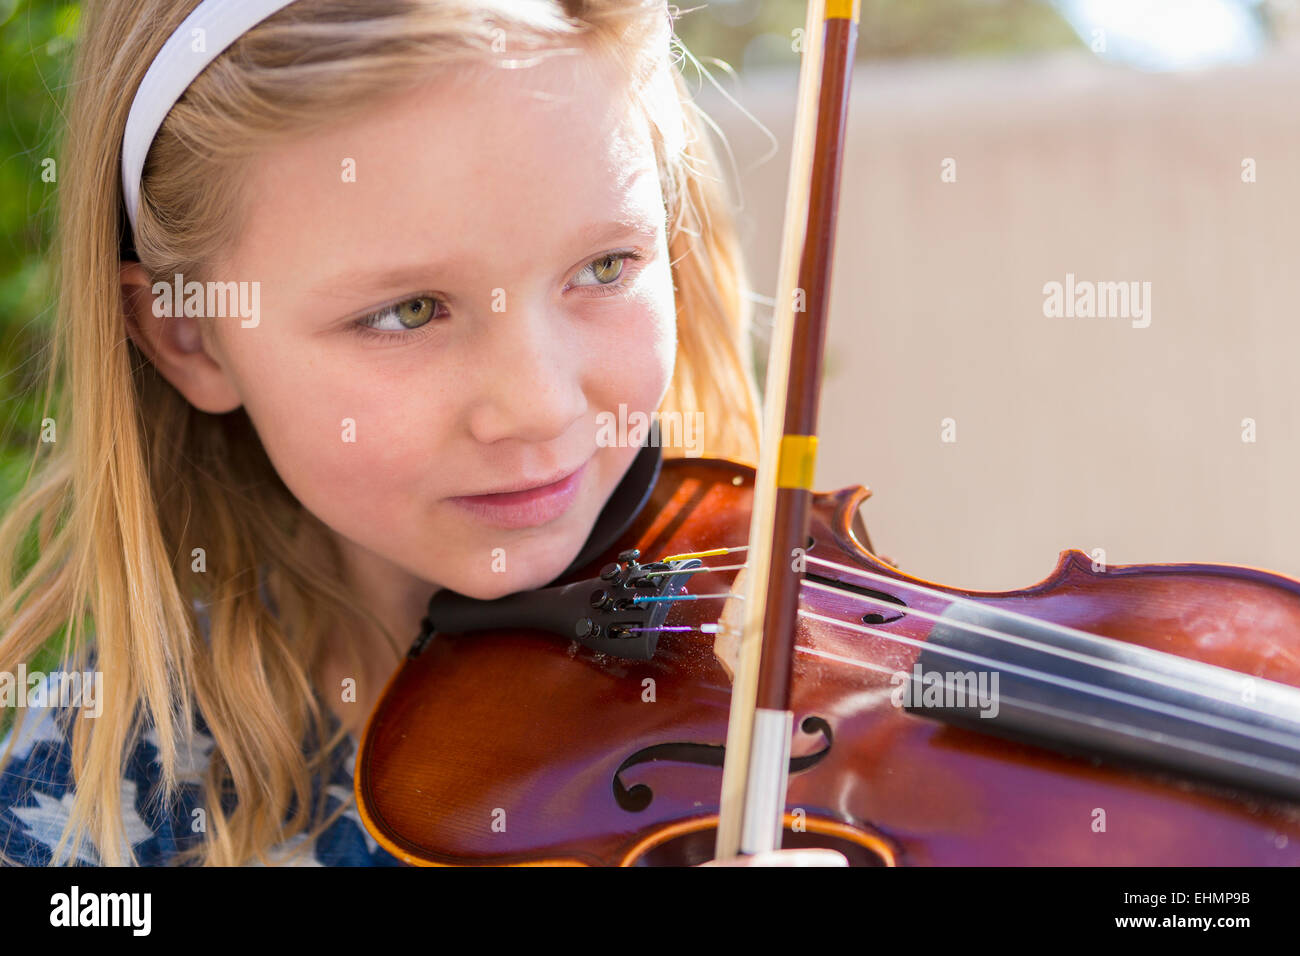 Close up of Caucasian girl playing violin Banque D'Images